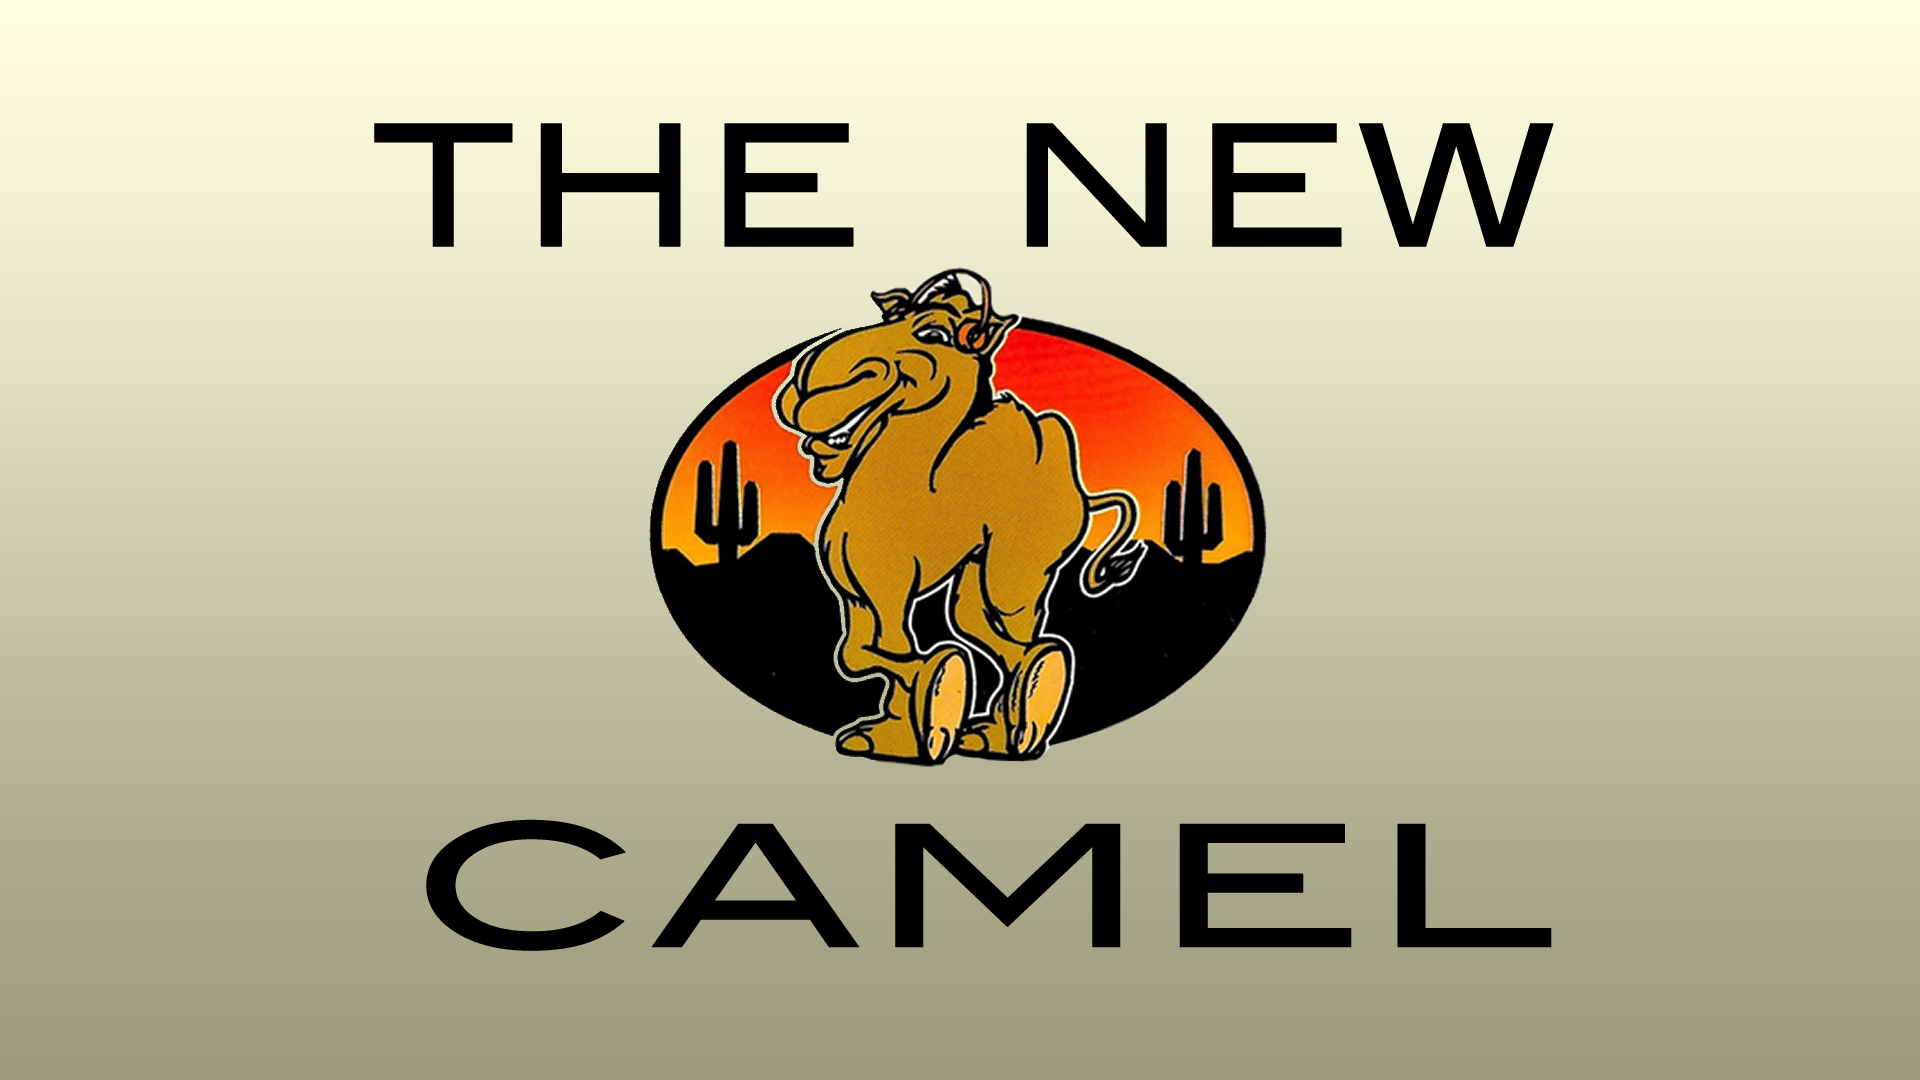 THE NEW CAMEL